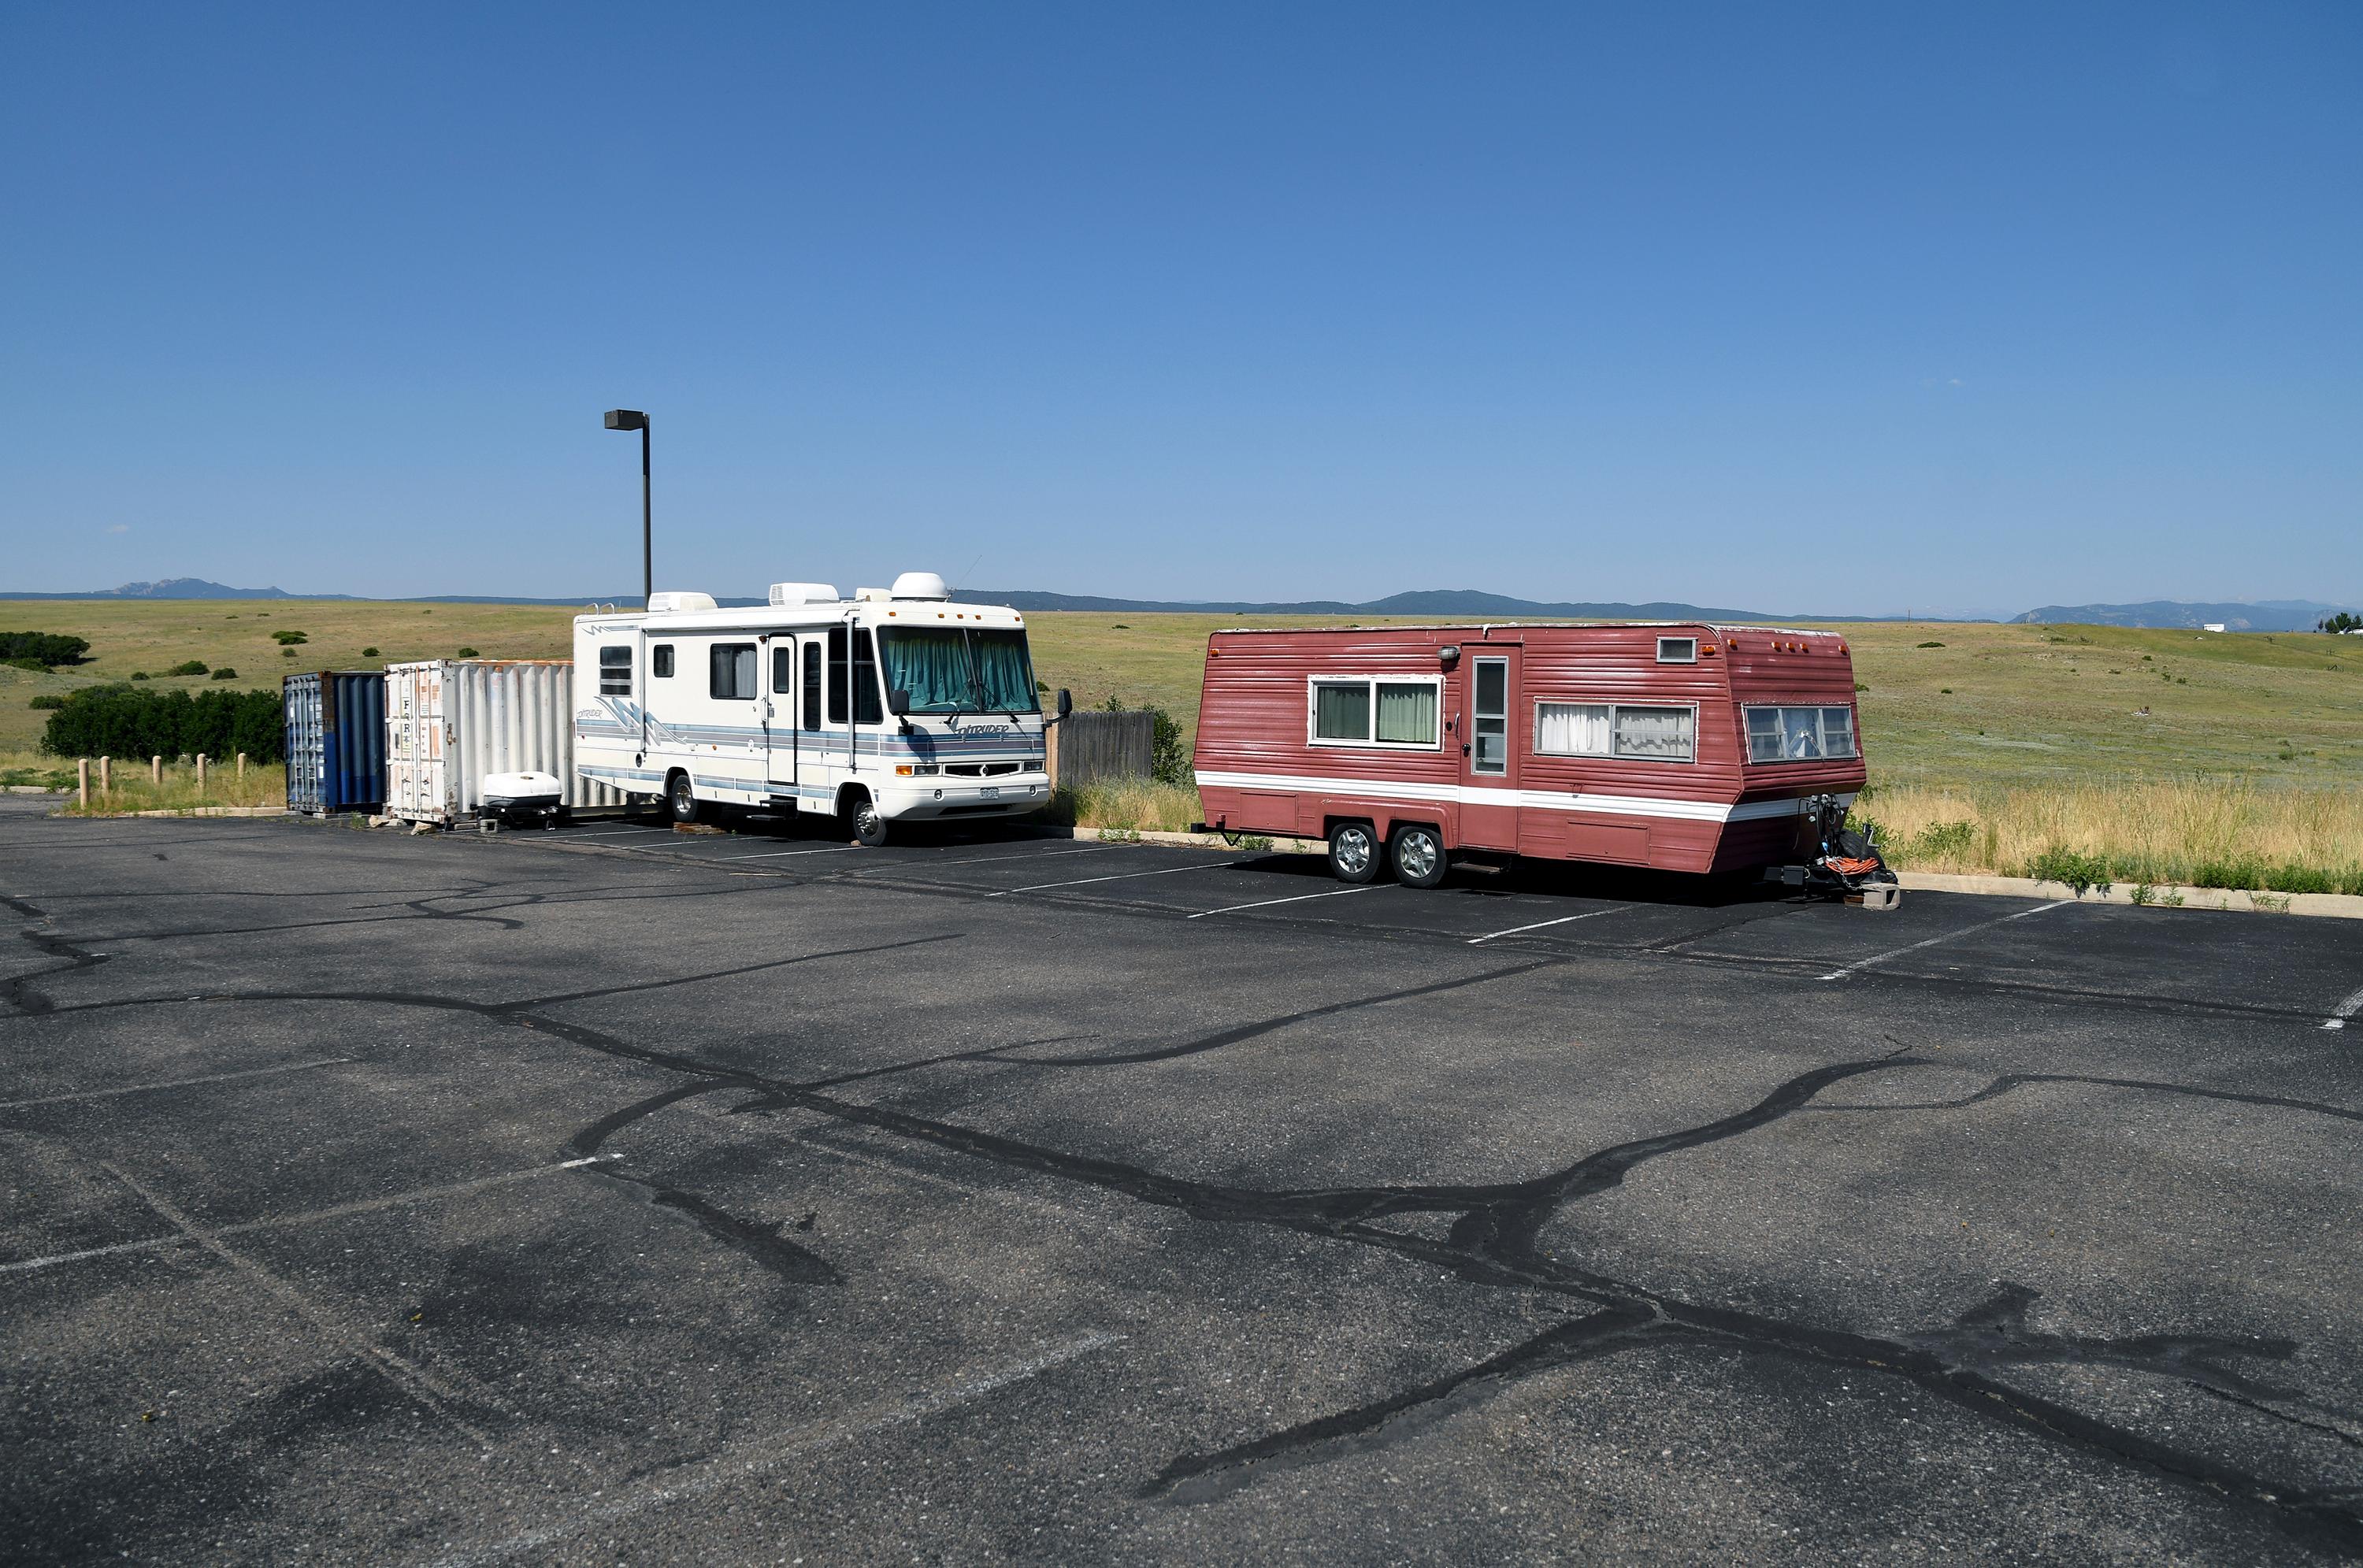 A recreational vehicle and camping trailer sit empty in The Rock church's parking lot in Castle Rock.